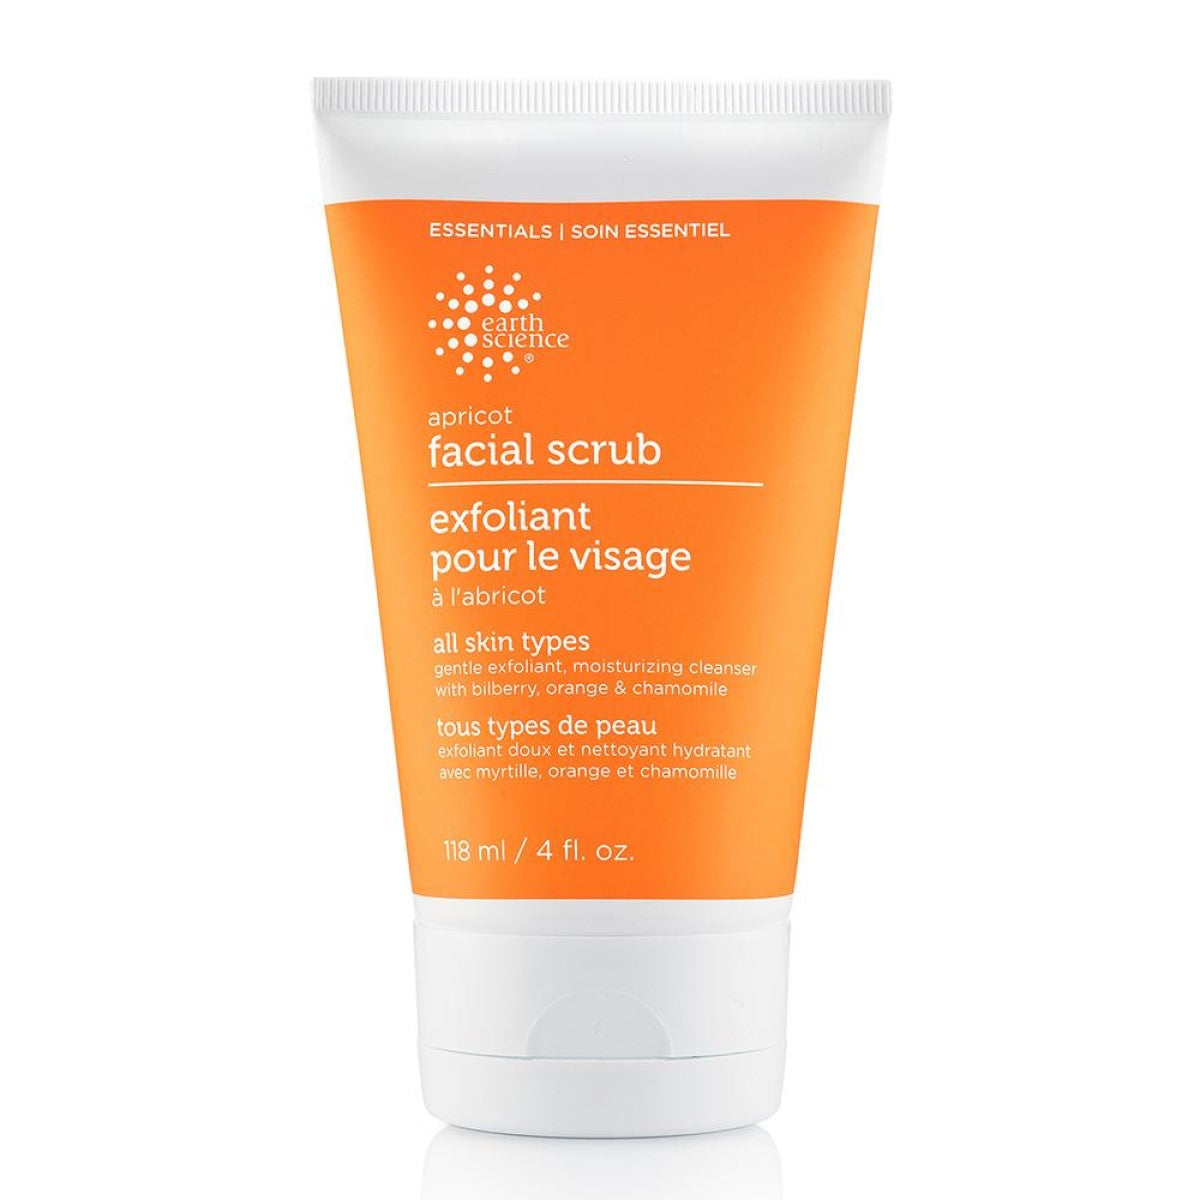 Primary image of Apricot Gentle Facial Scrub